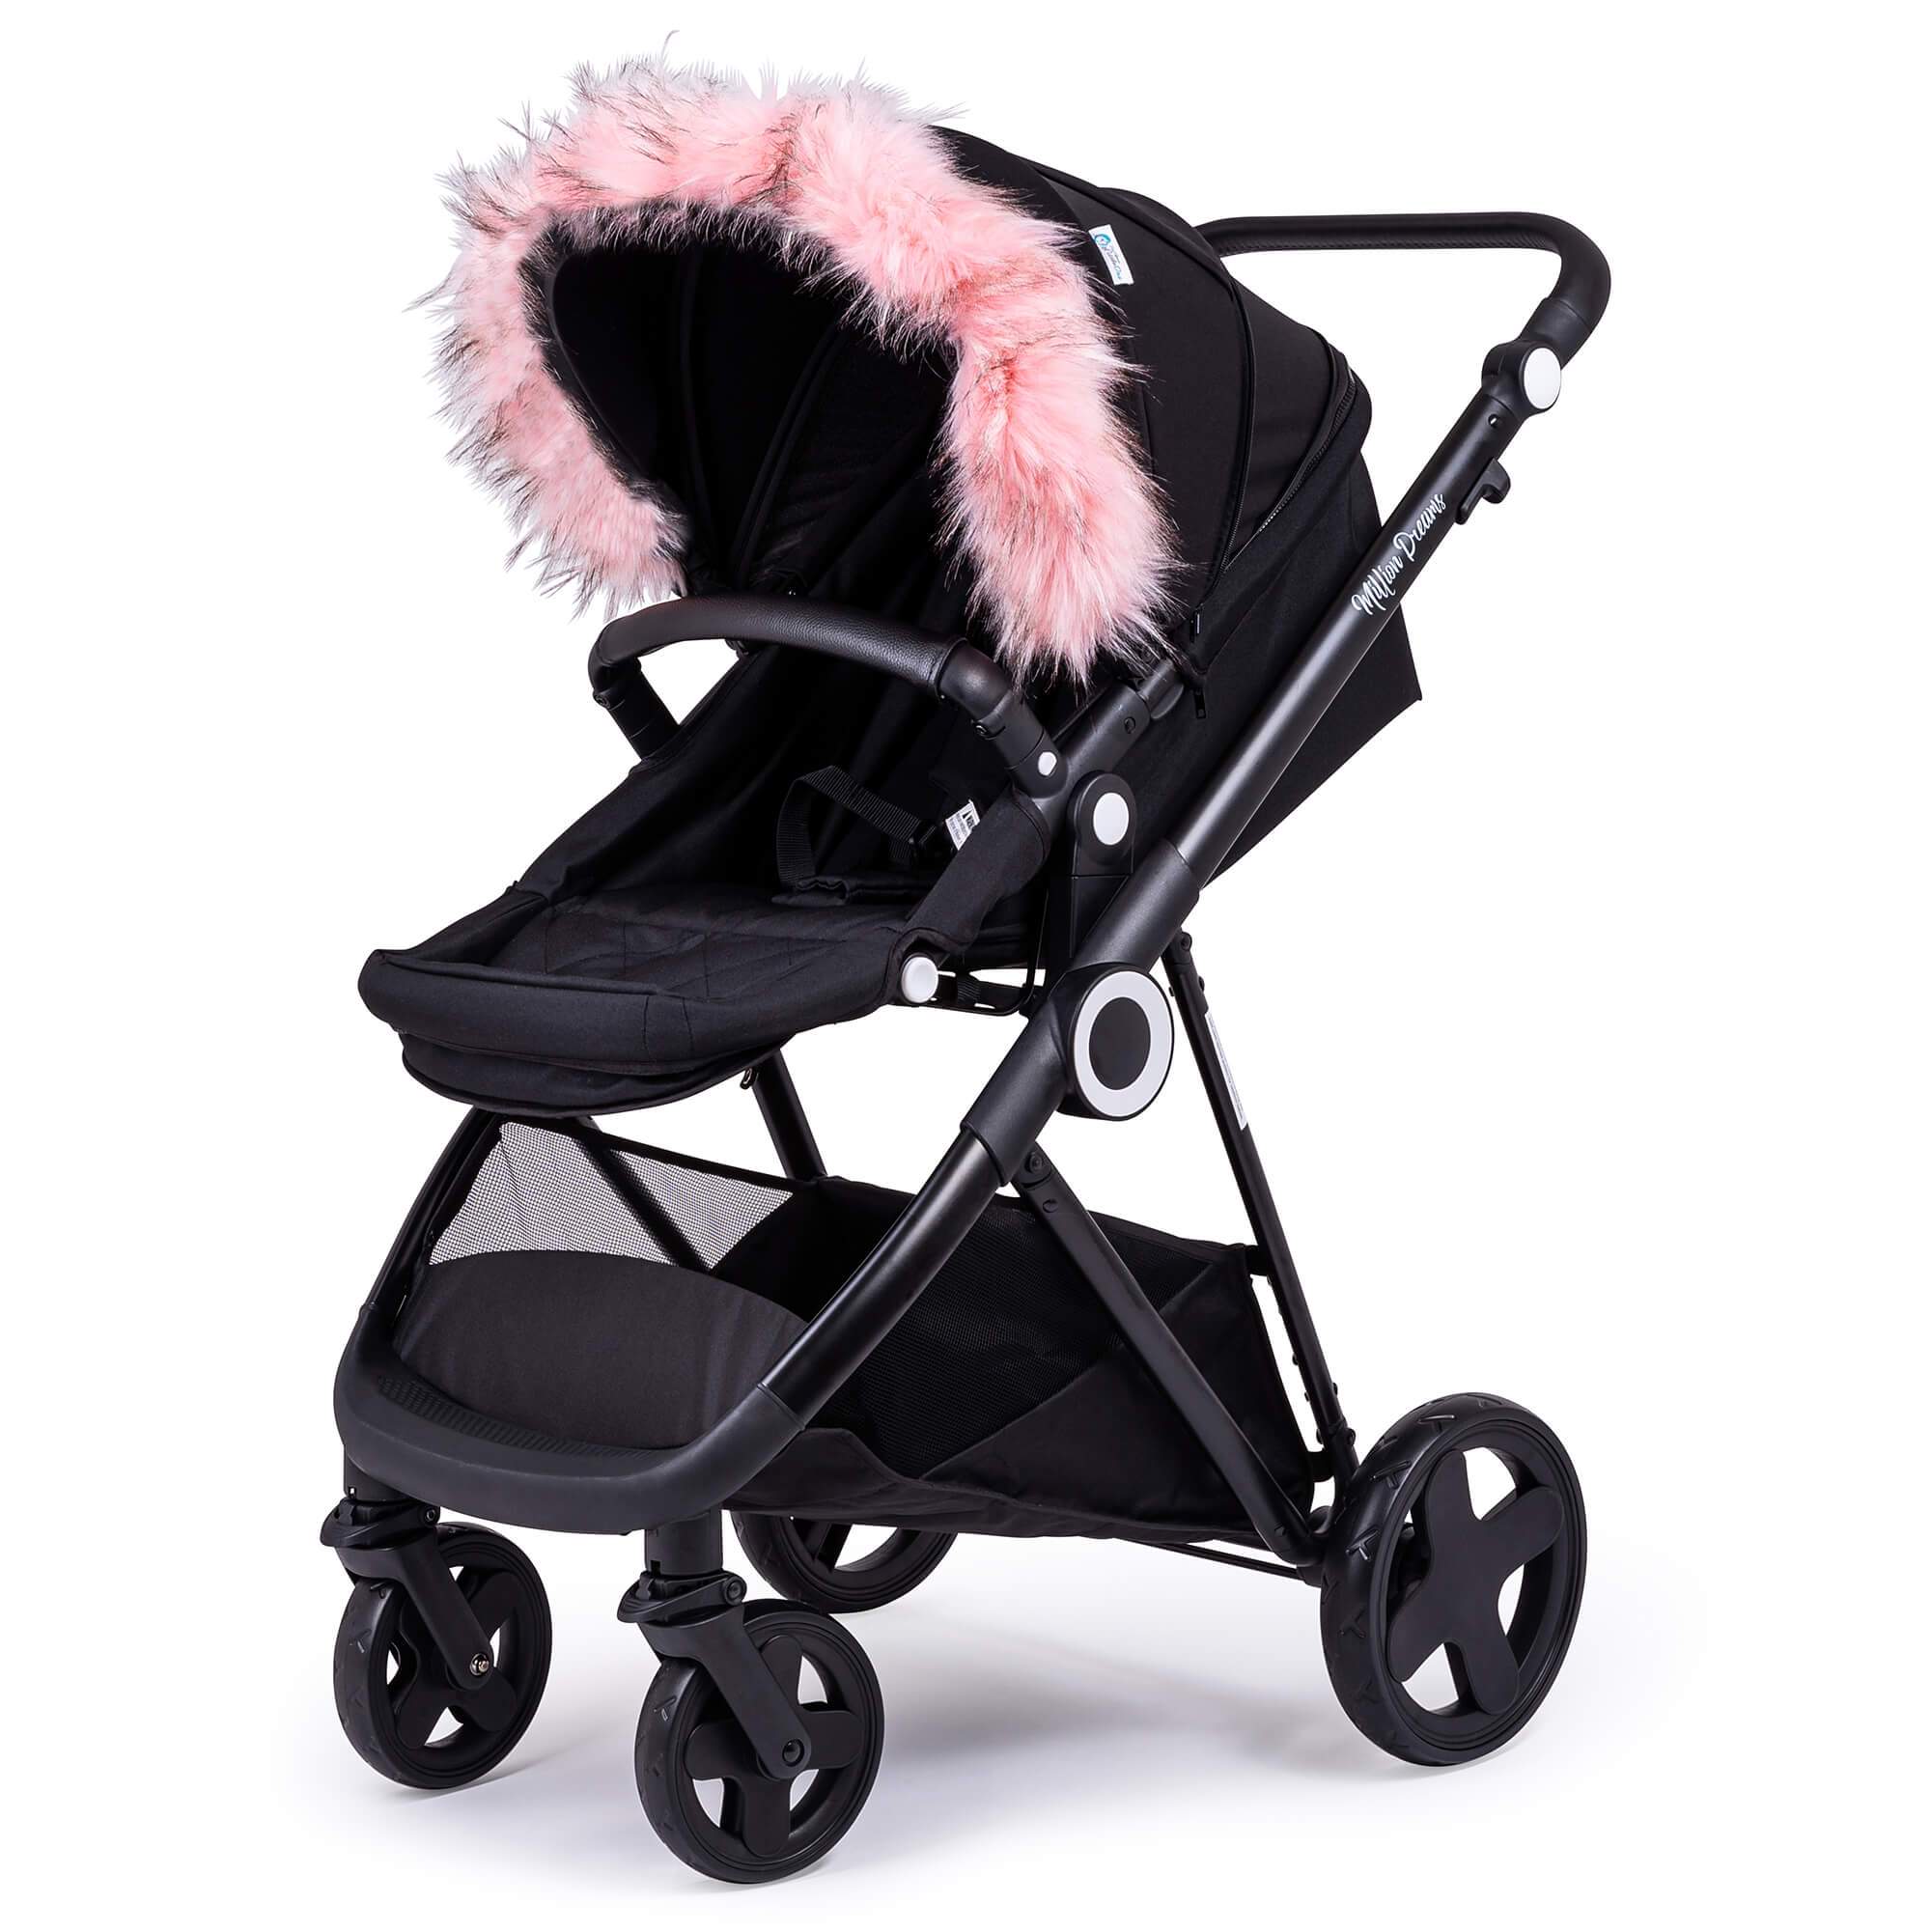 Pram Fur Hood Trim Attachment For Pushchair Compatible with Mee-Go - Light Pink / Fits All Models | For Your Little One